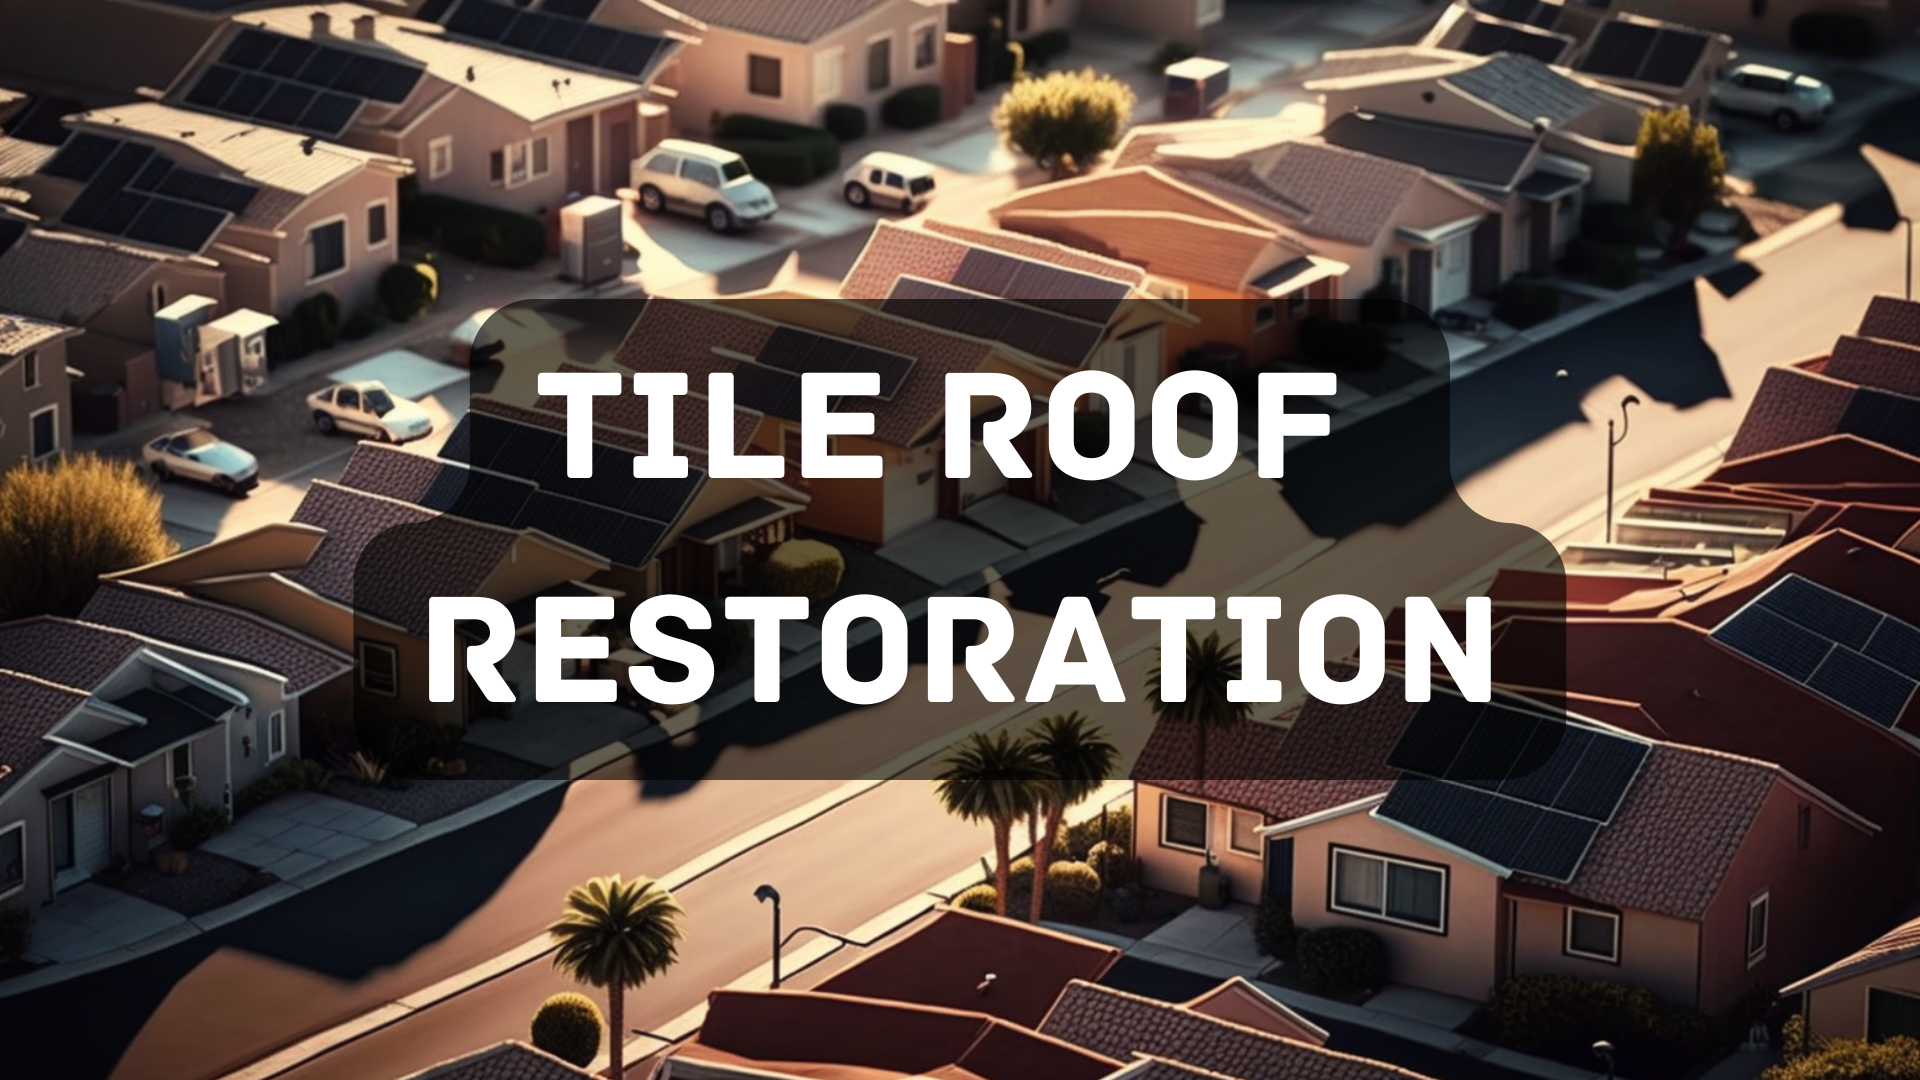 Tile Roof Restoration: Renew Your Roof and Protect Your Home in 2023